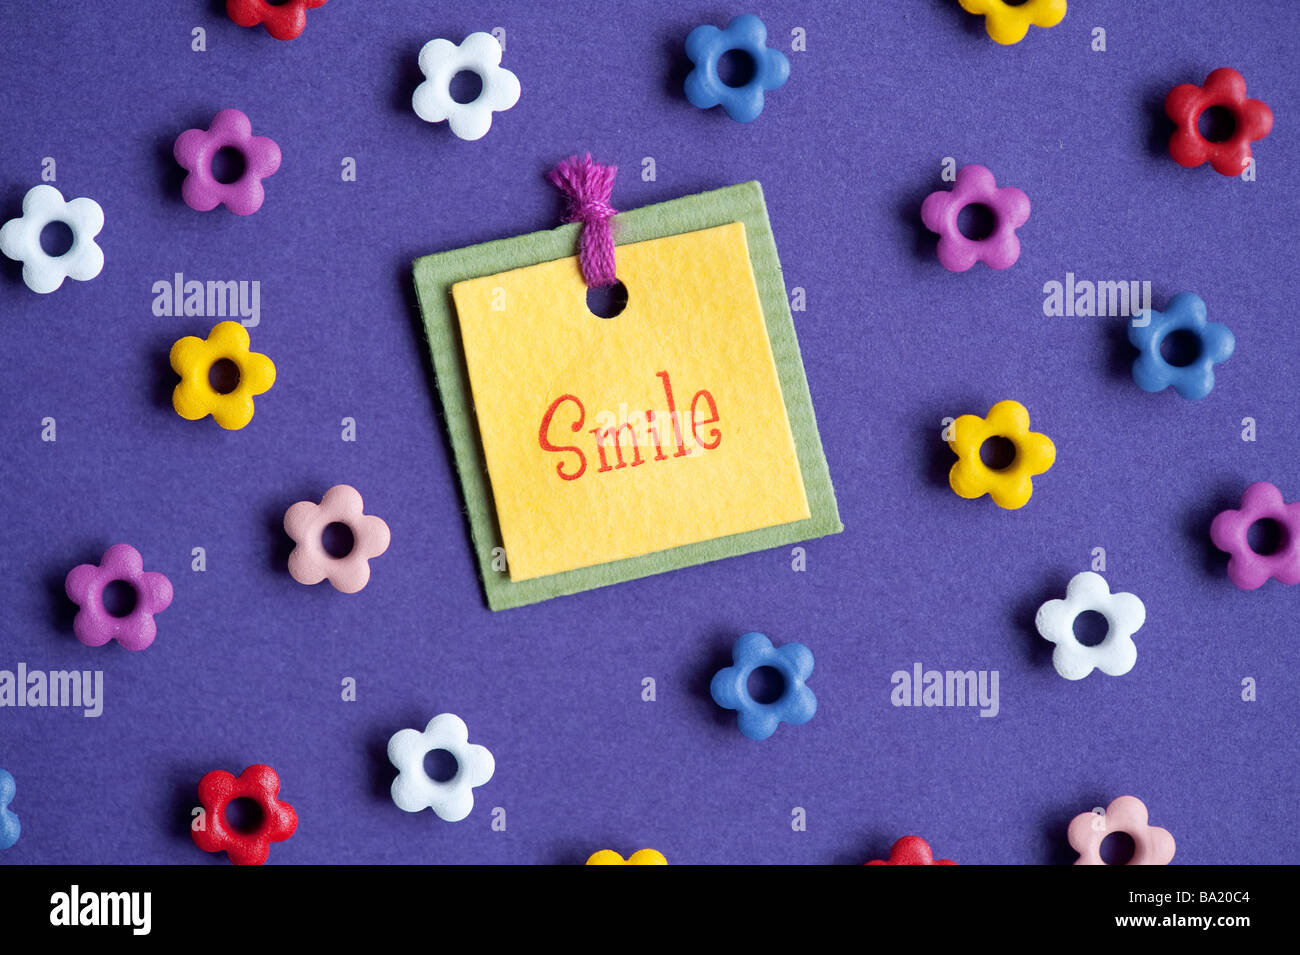 Smile label and flower shapes on purple background Stock Photo